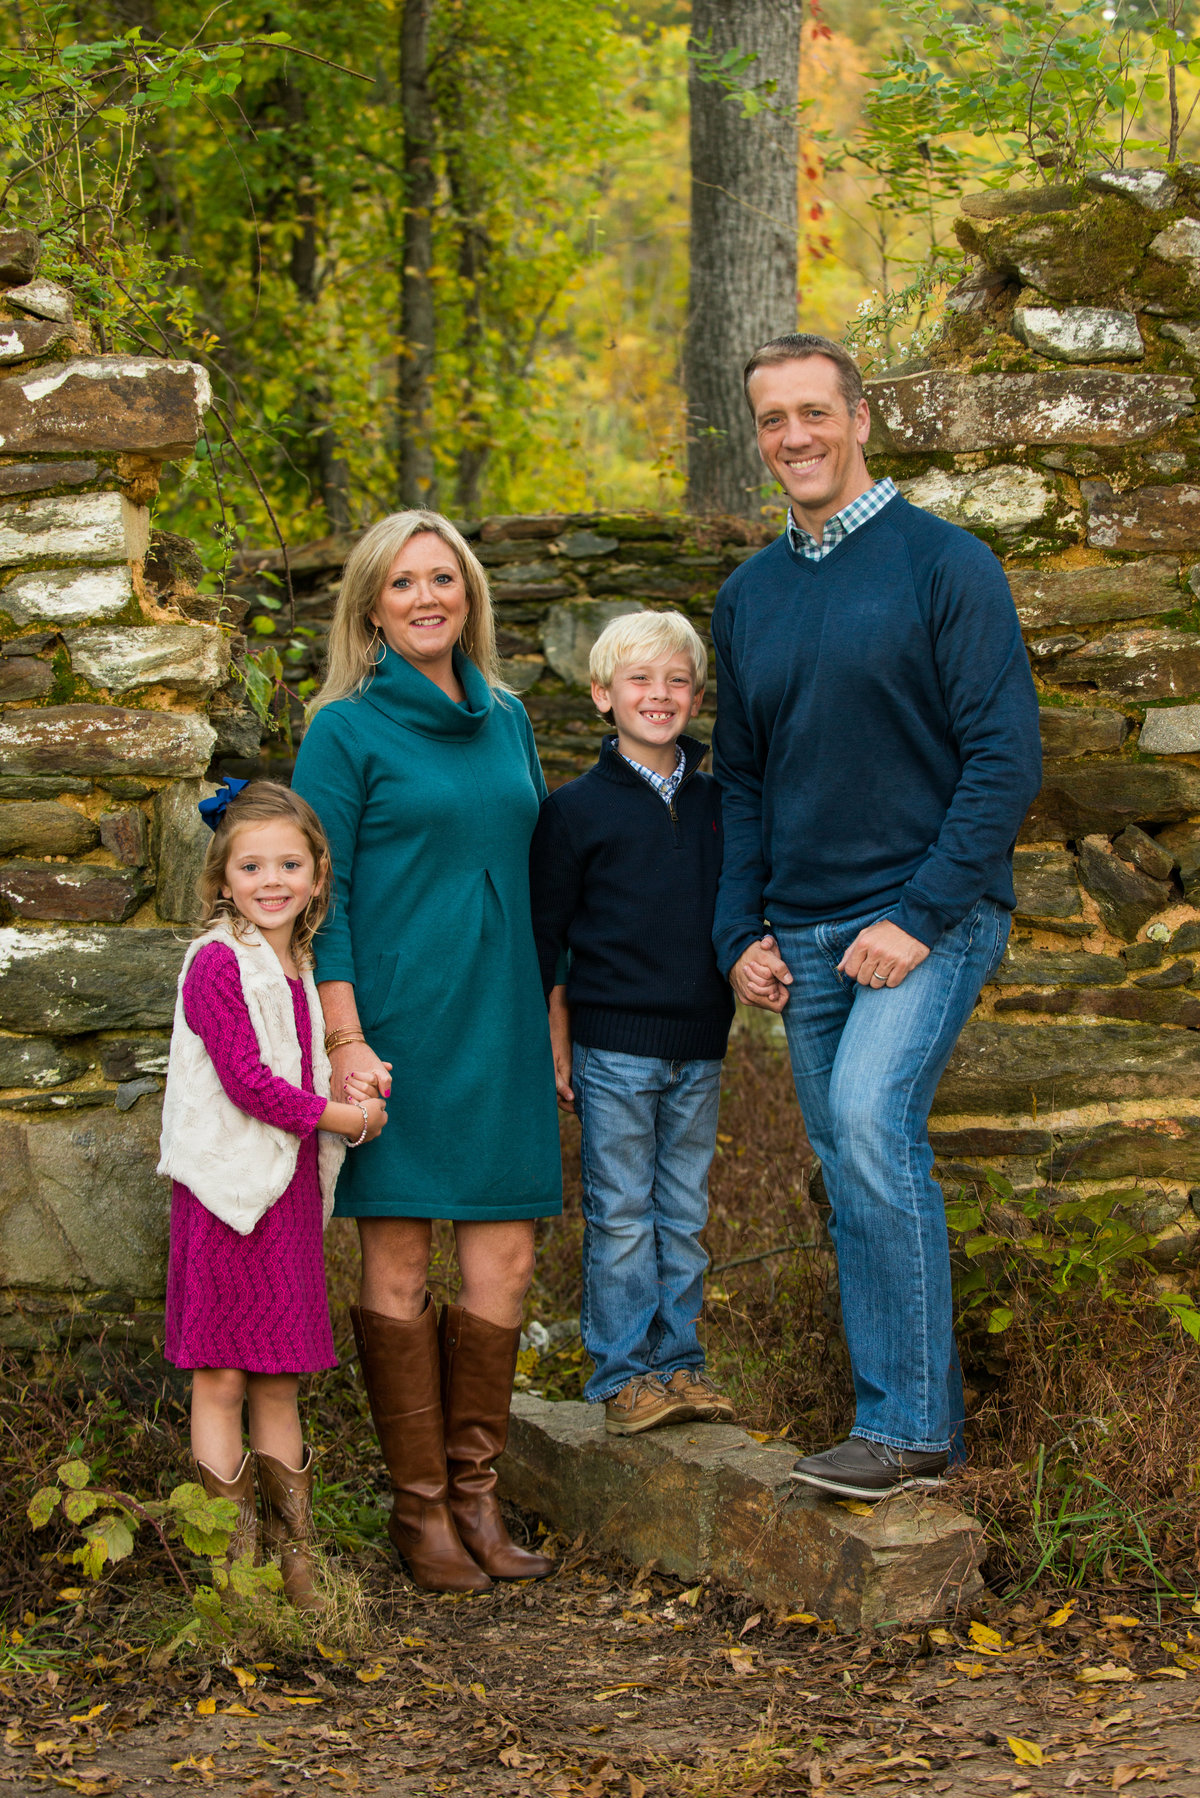 Shayna Hardy can capture what you are looking for in family photography near Baltimore